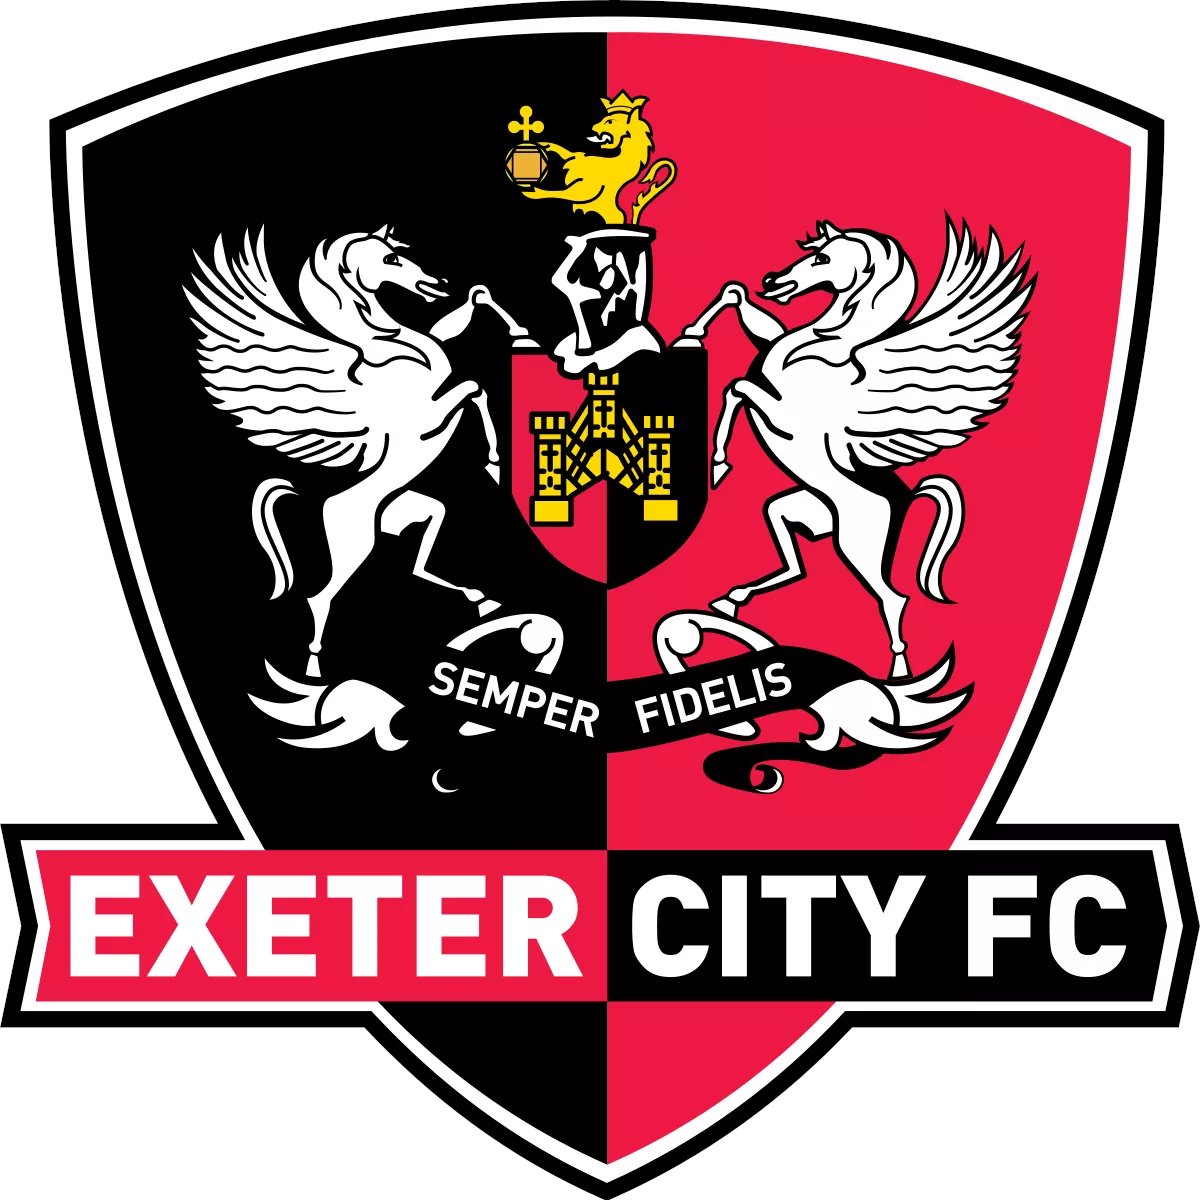 25) Exeter City Points: 161 Manager: Chad Gribble (what a name) My favourite team so far. Ollie Watkins x Kieffer Moore is a defenders nightmare. That's also the strongest central midfield trio we've seen so far.